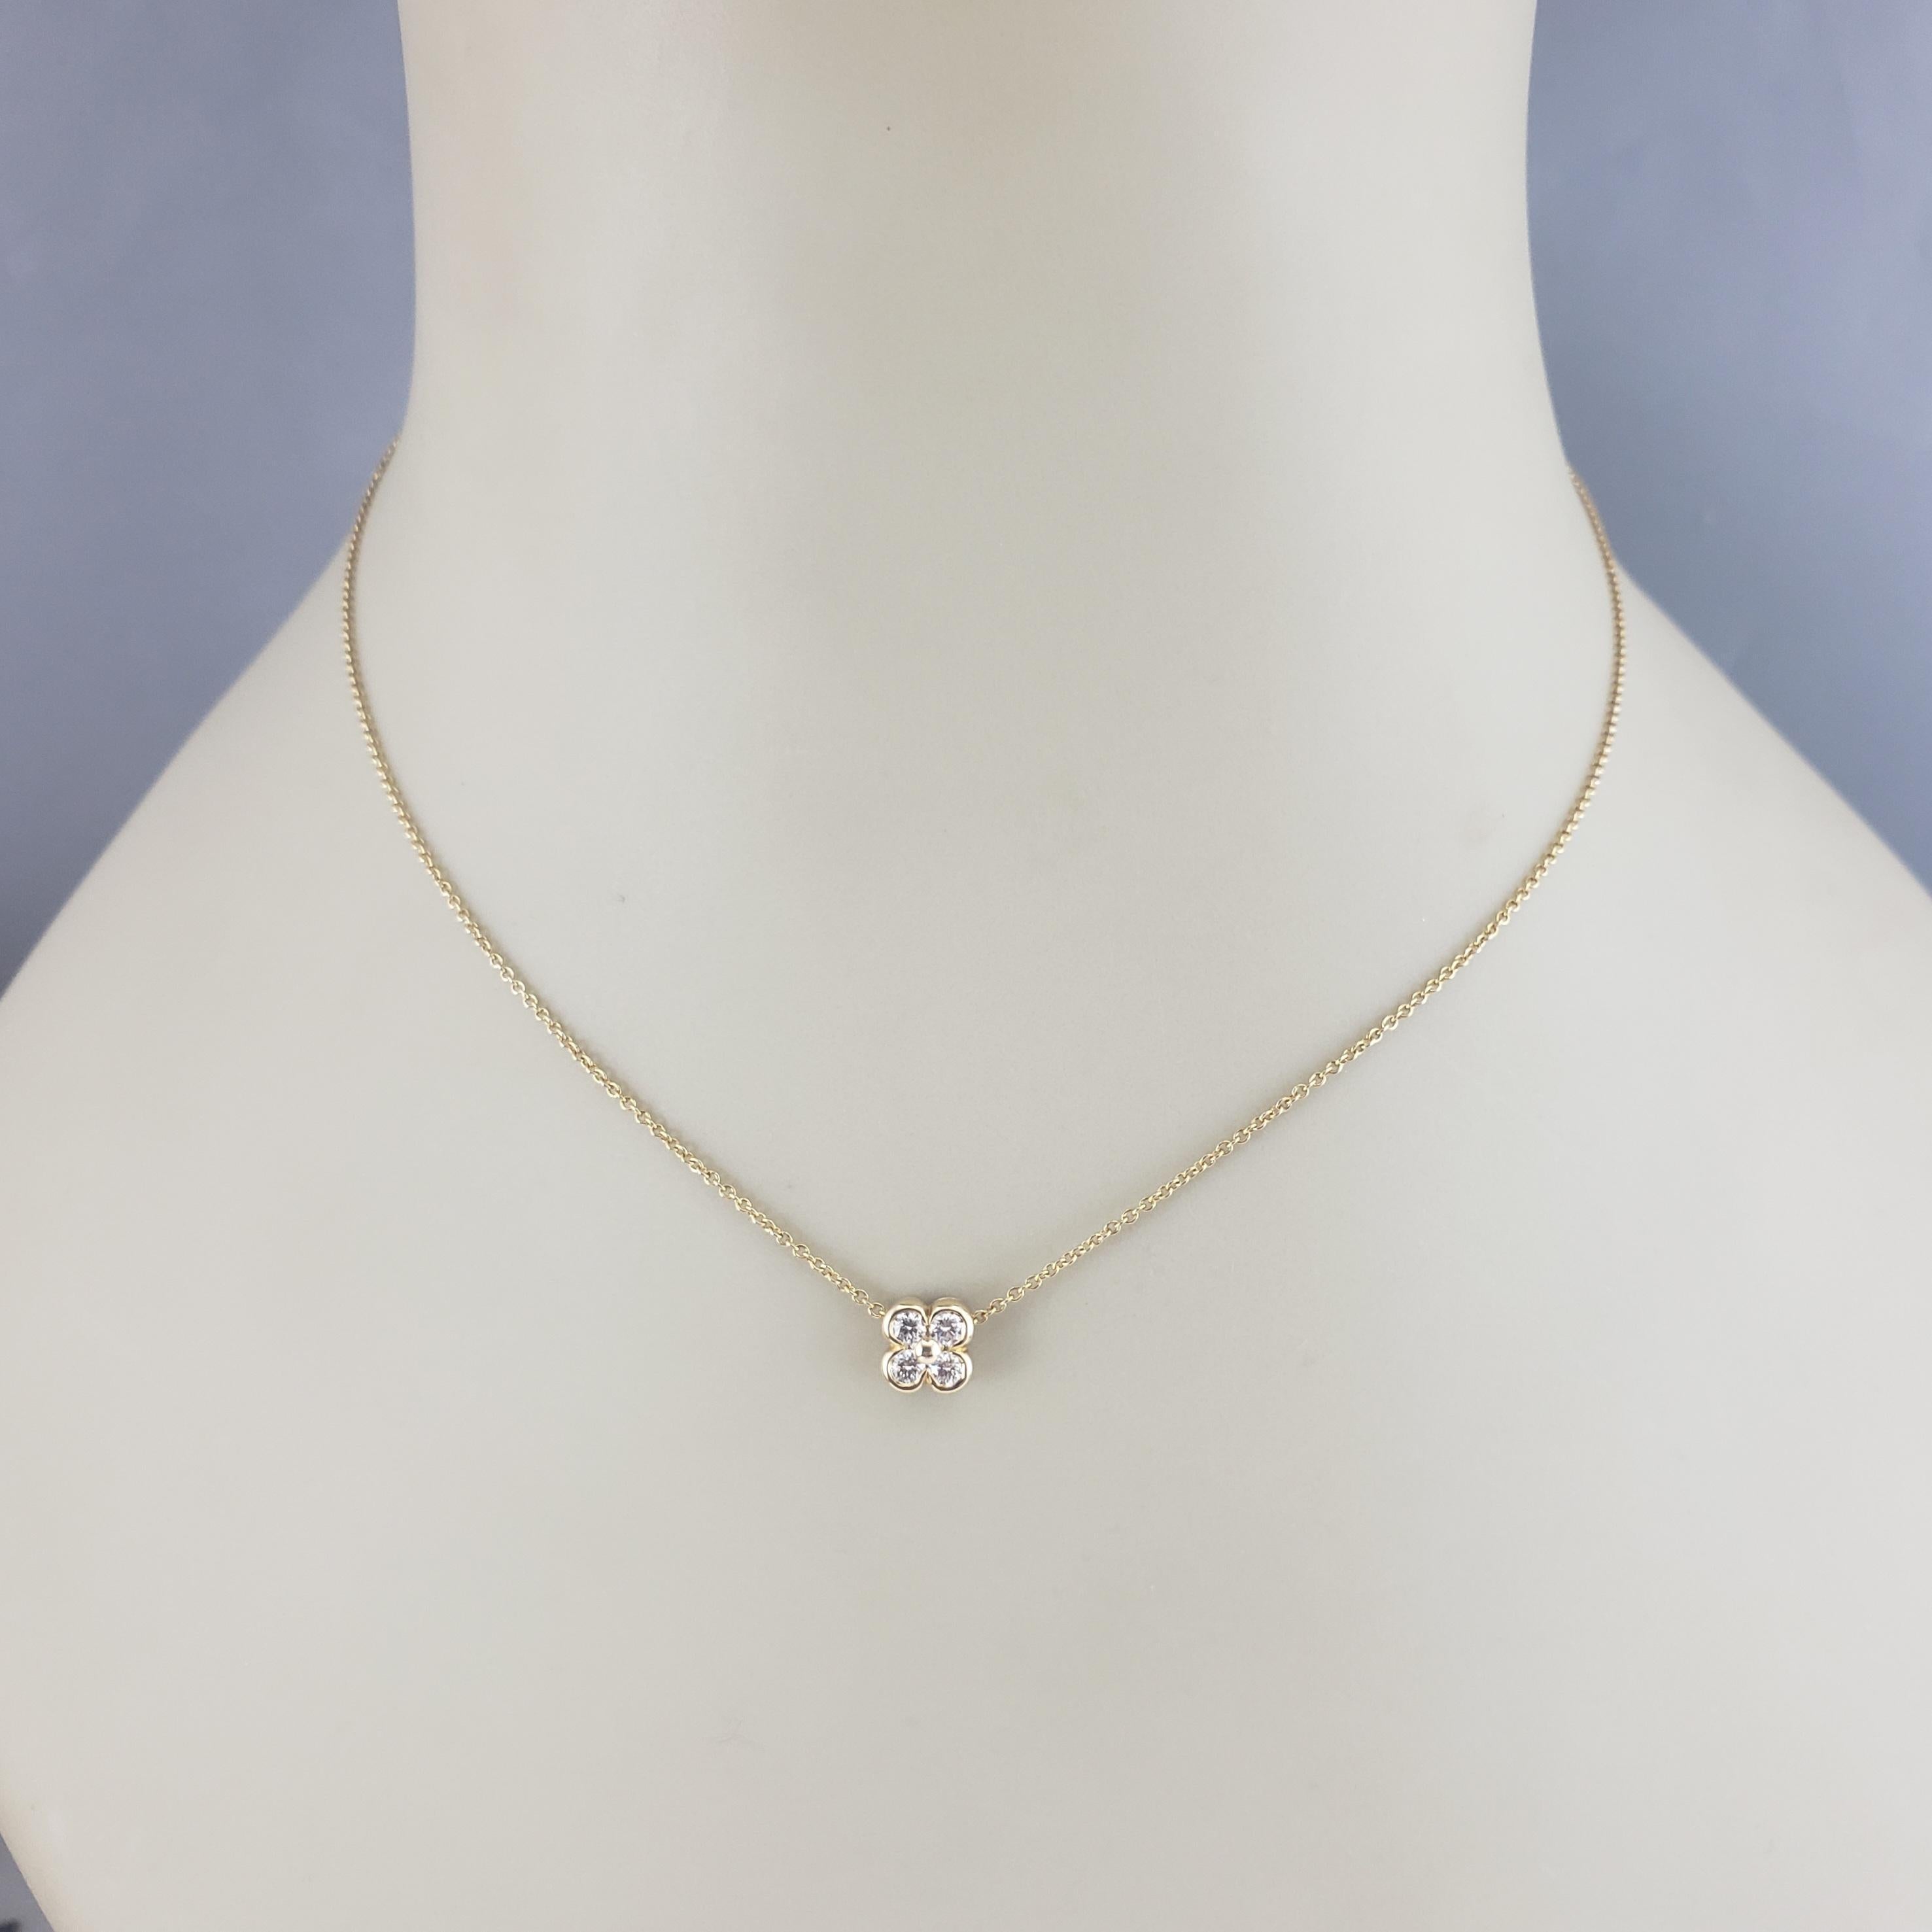 Tiffany & Co. 18 Karat Yellow Gold Diamond Flower Clover Necklace #16837 For Sale 2